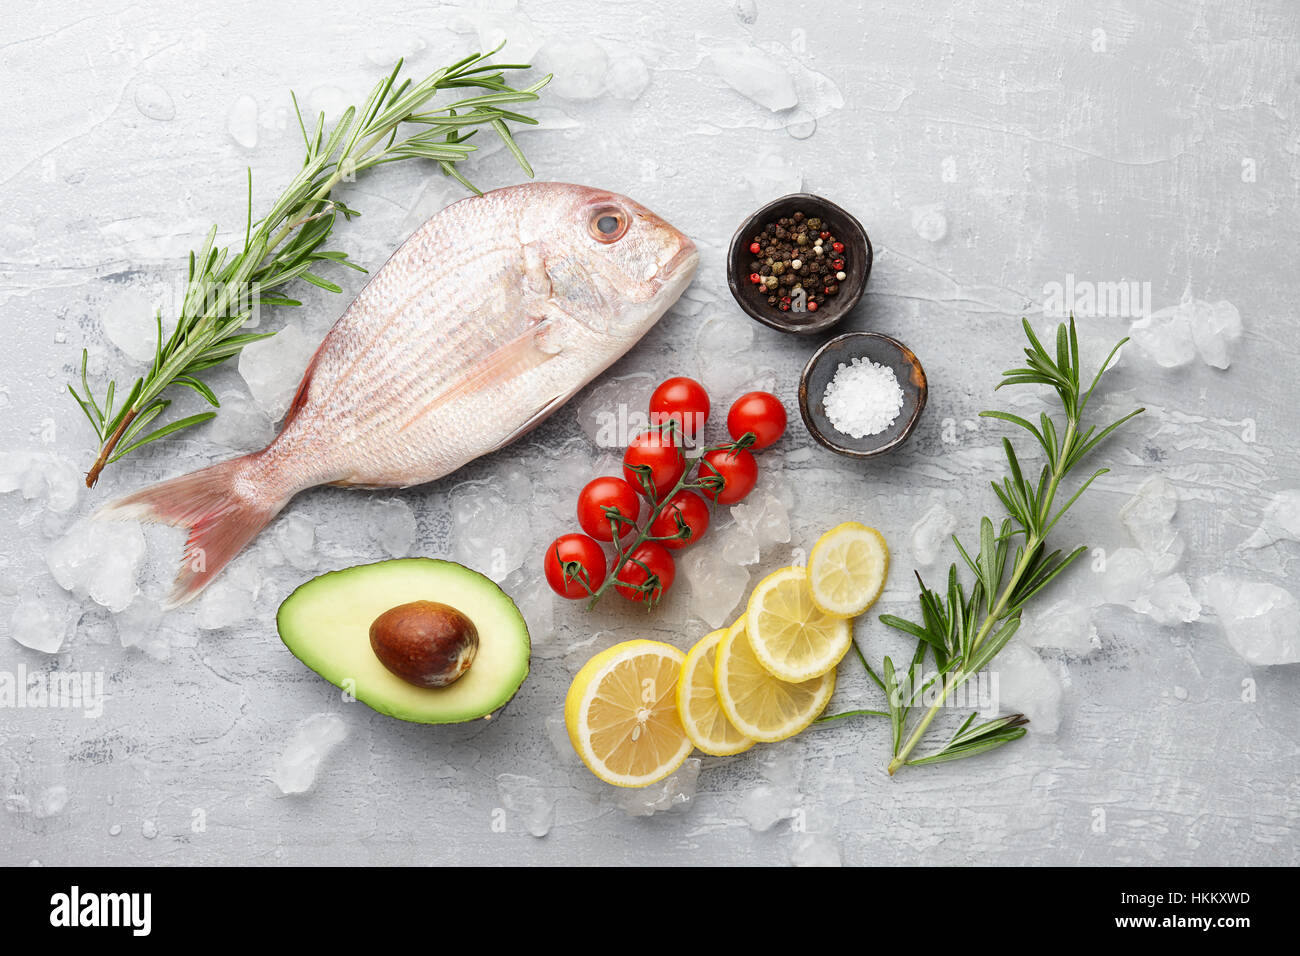 Fish cooking: fresh red Japanese seabream, lemon slices, avocado fruit, chili pepper, cherry tomatoes, olive oil, rosemary and spices on gray stone ba Stock Photo